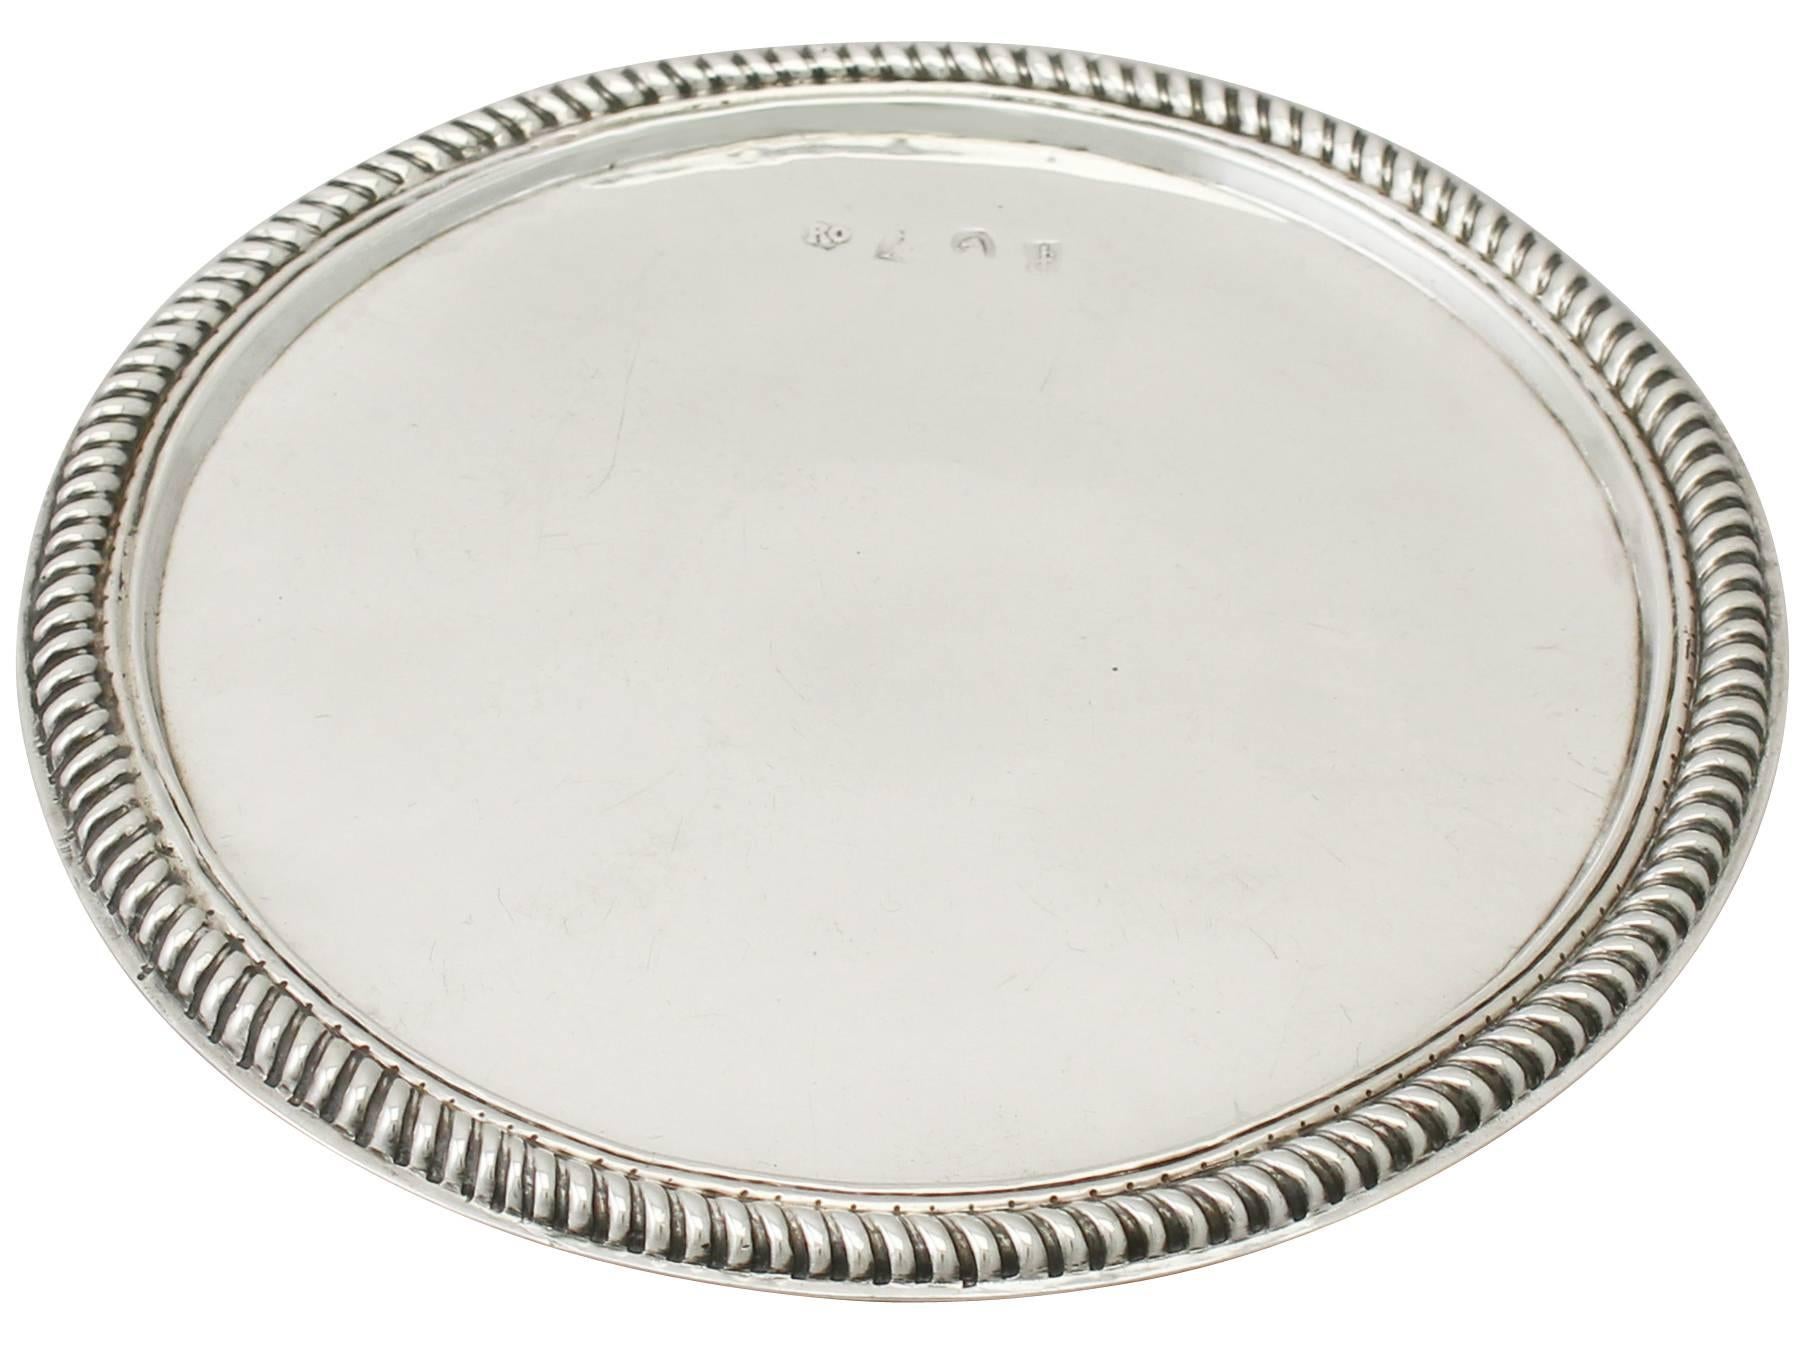 An exceptional, fine and impressive antique William III English Britannia standard silver tazza; part of our dining silverware collection.

This exceptional antique William III English Britannia* standard silver tazza has a plain circular form